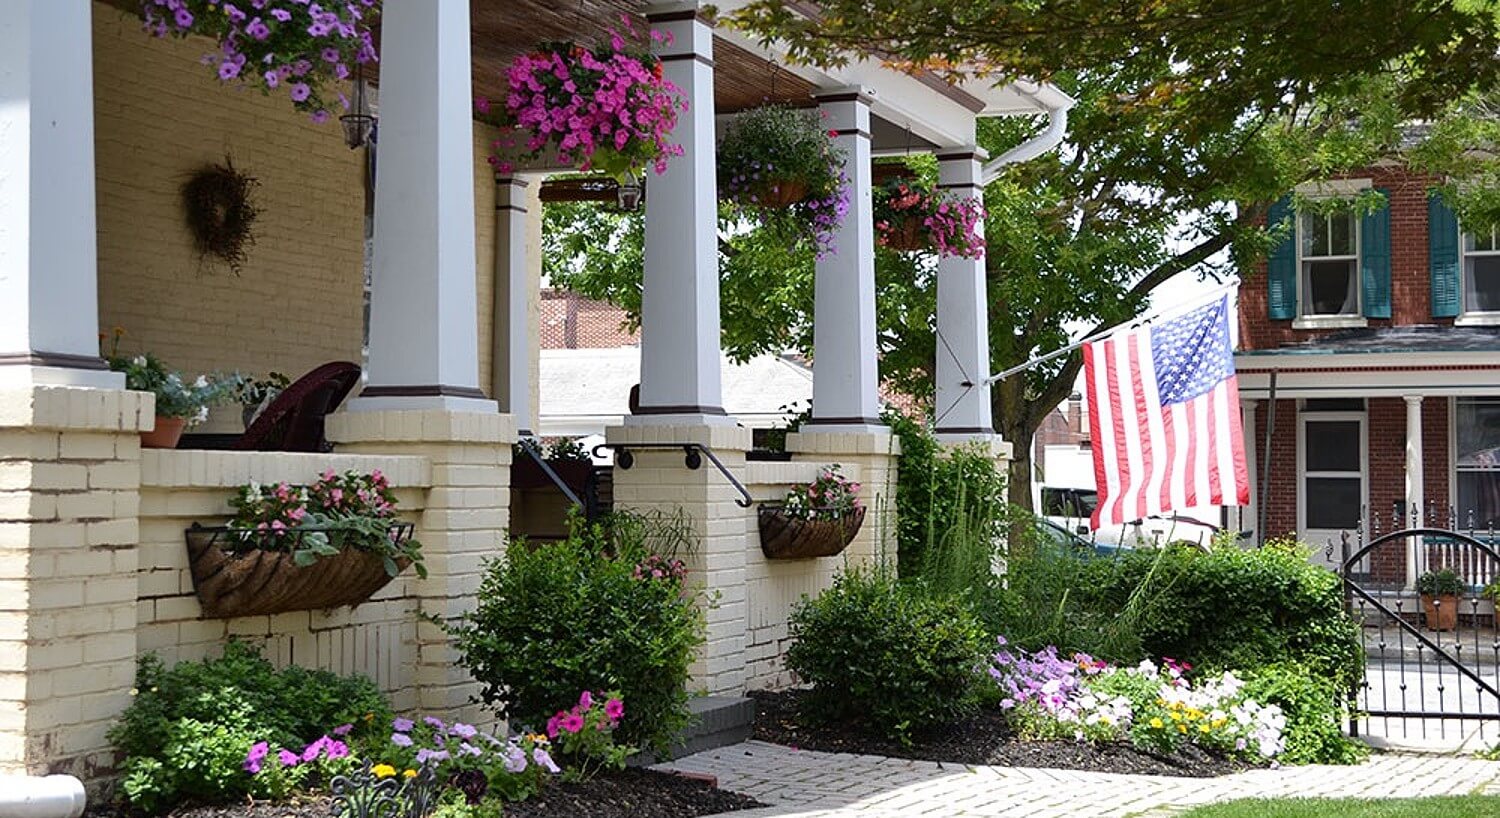 Front porch of a brick home with tall white pillars, beautiful hanging baskets and flag on a pole